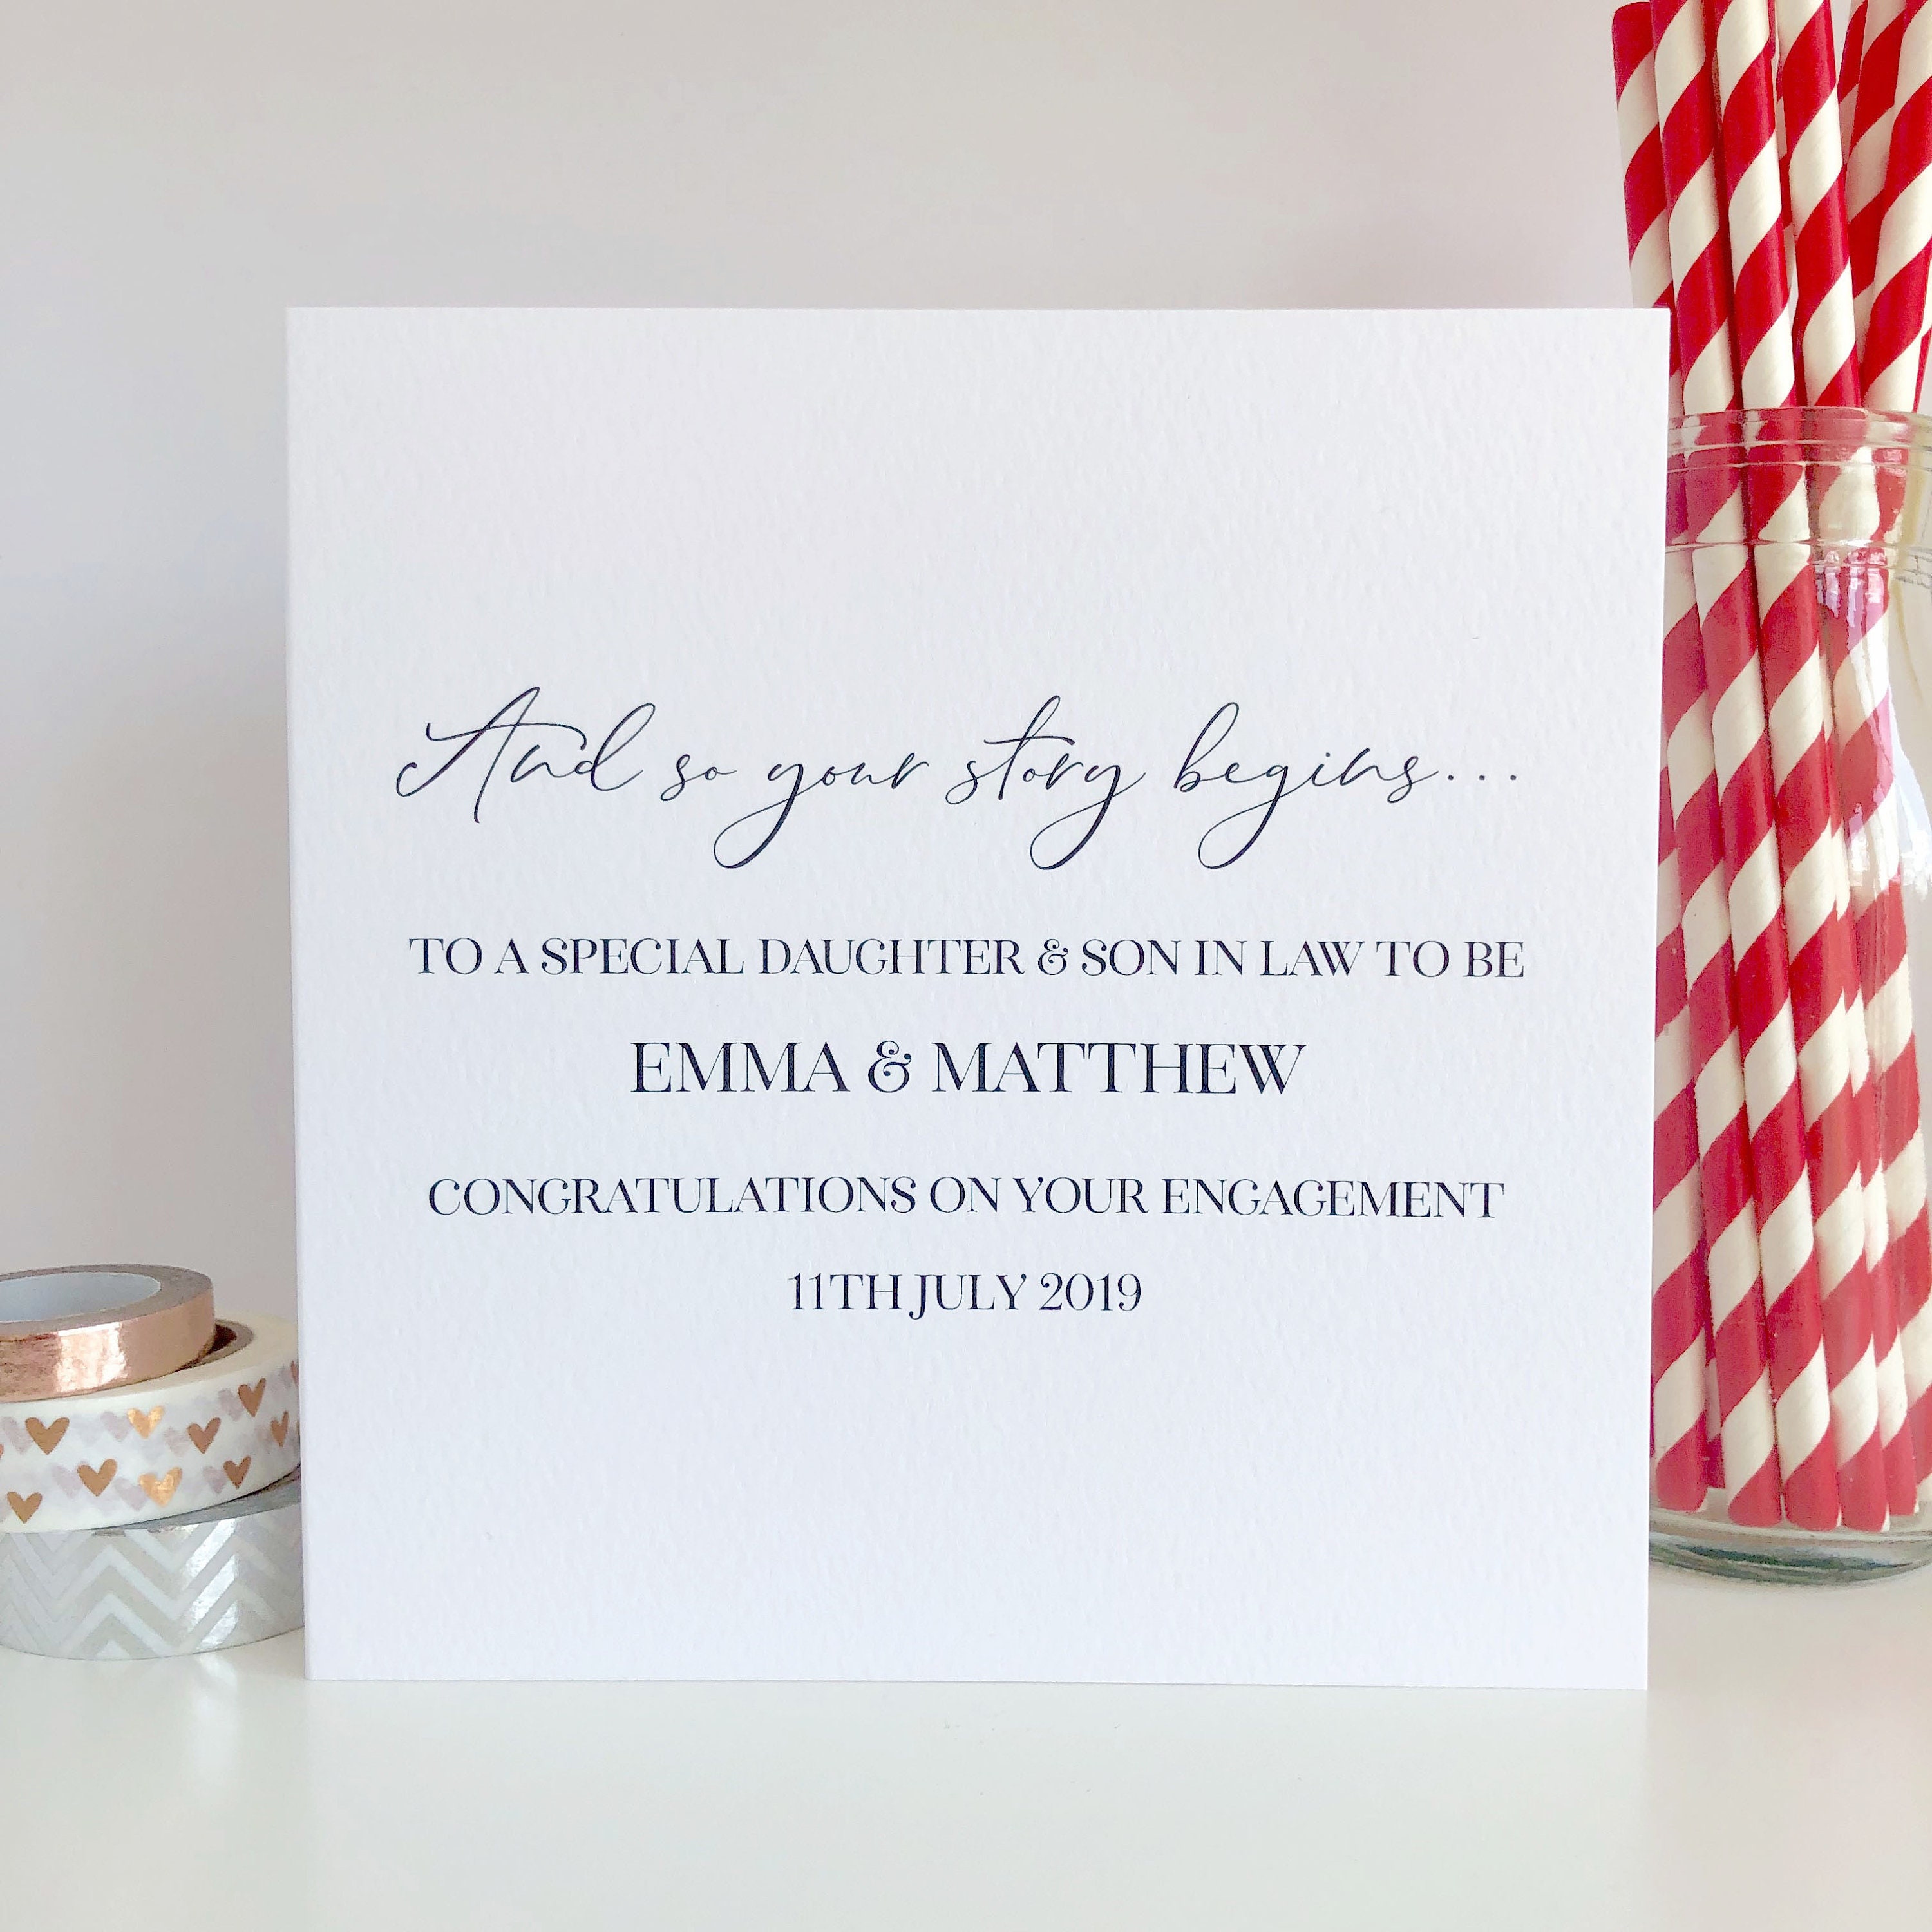 Personalised Congratulations on Your Engagement Card to